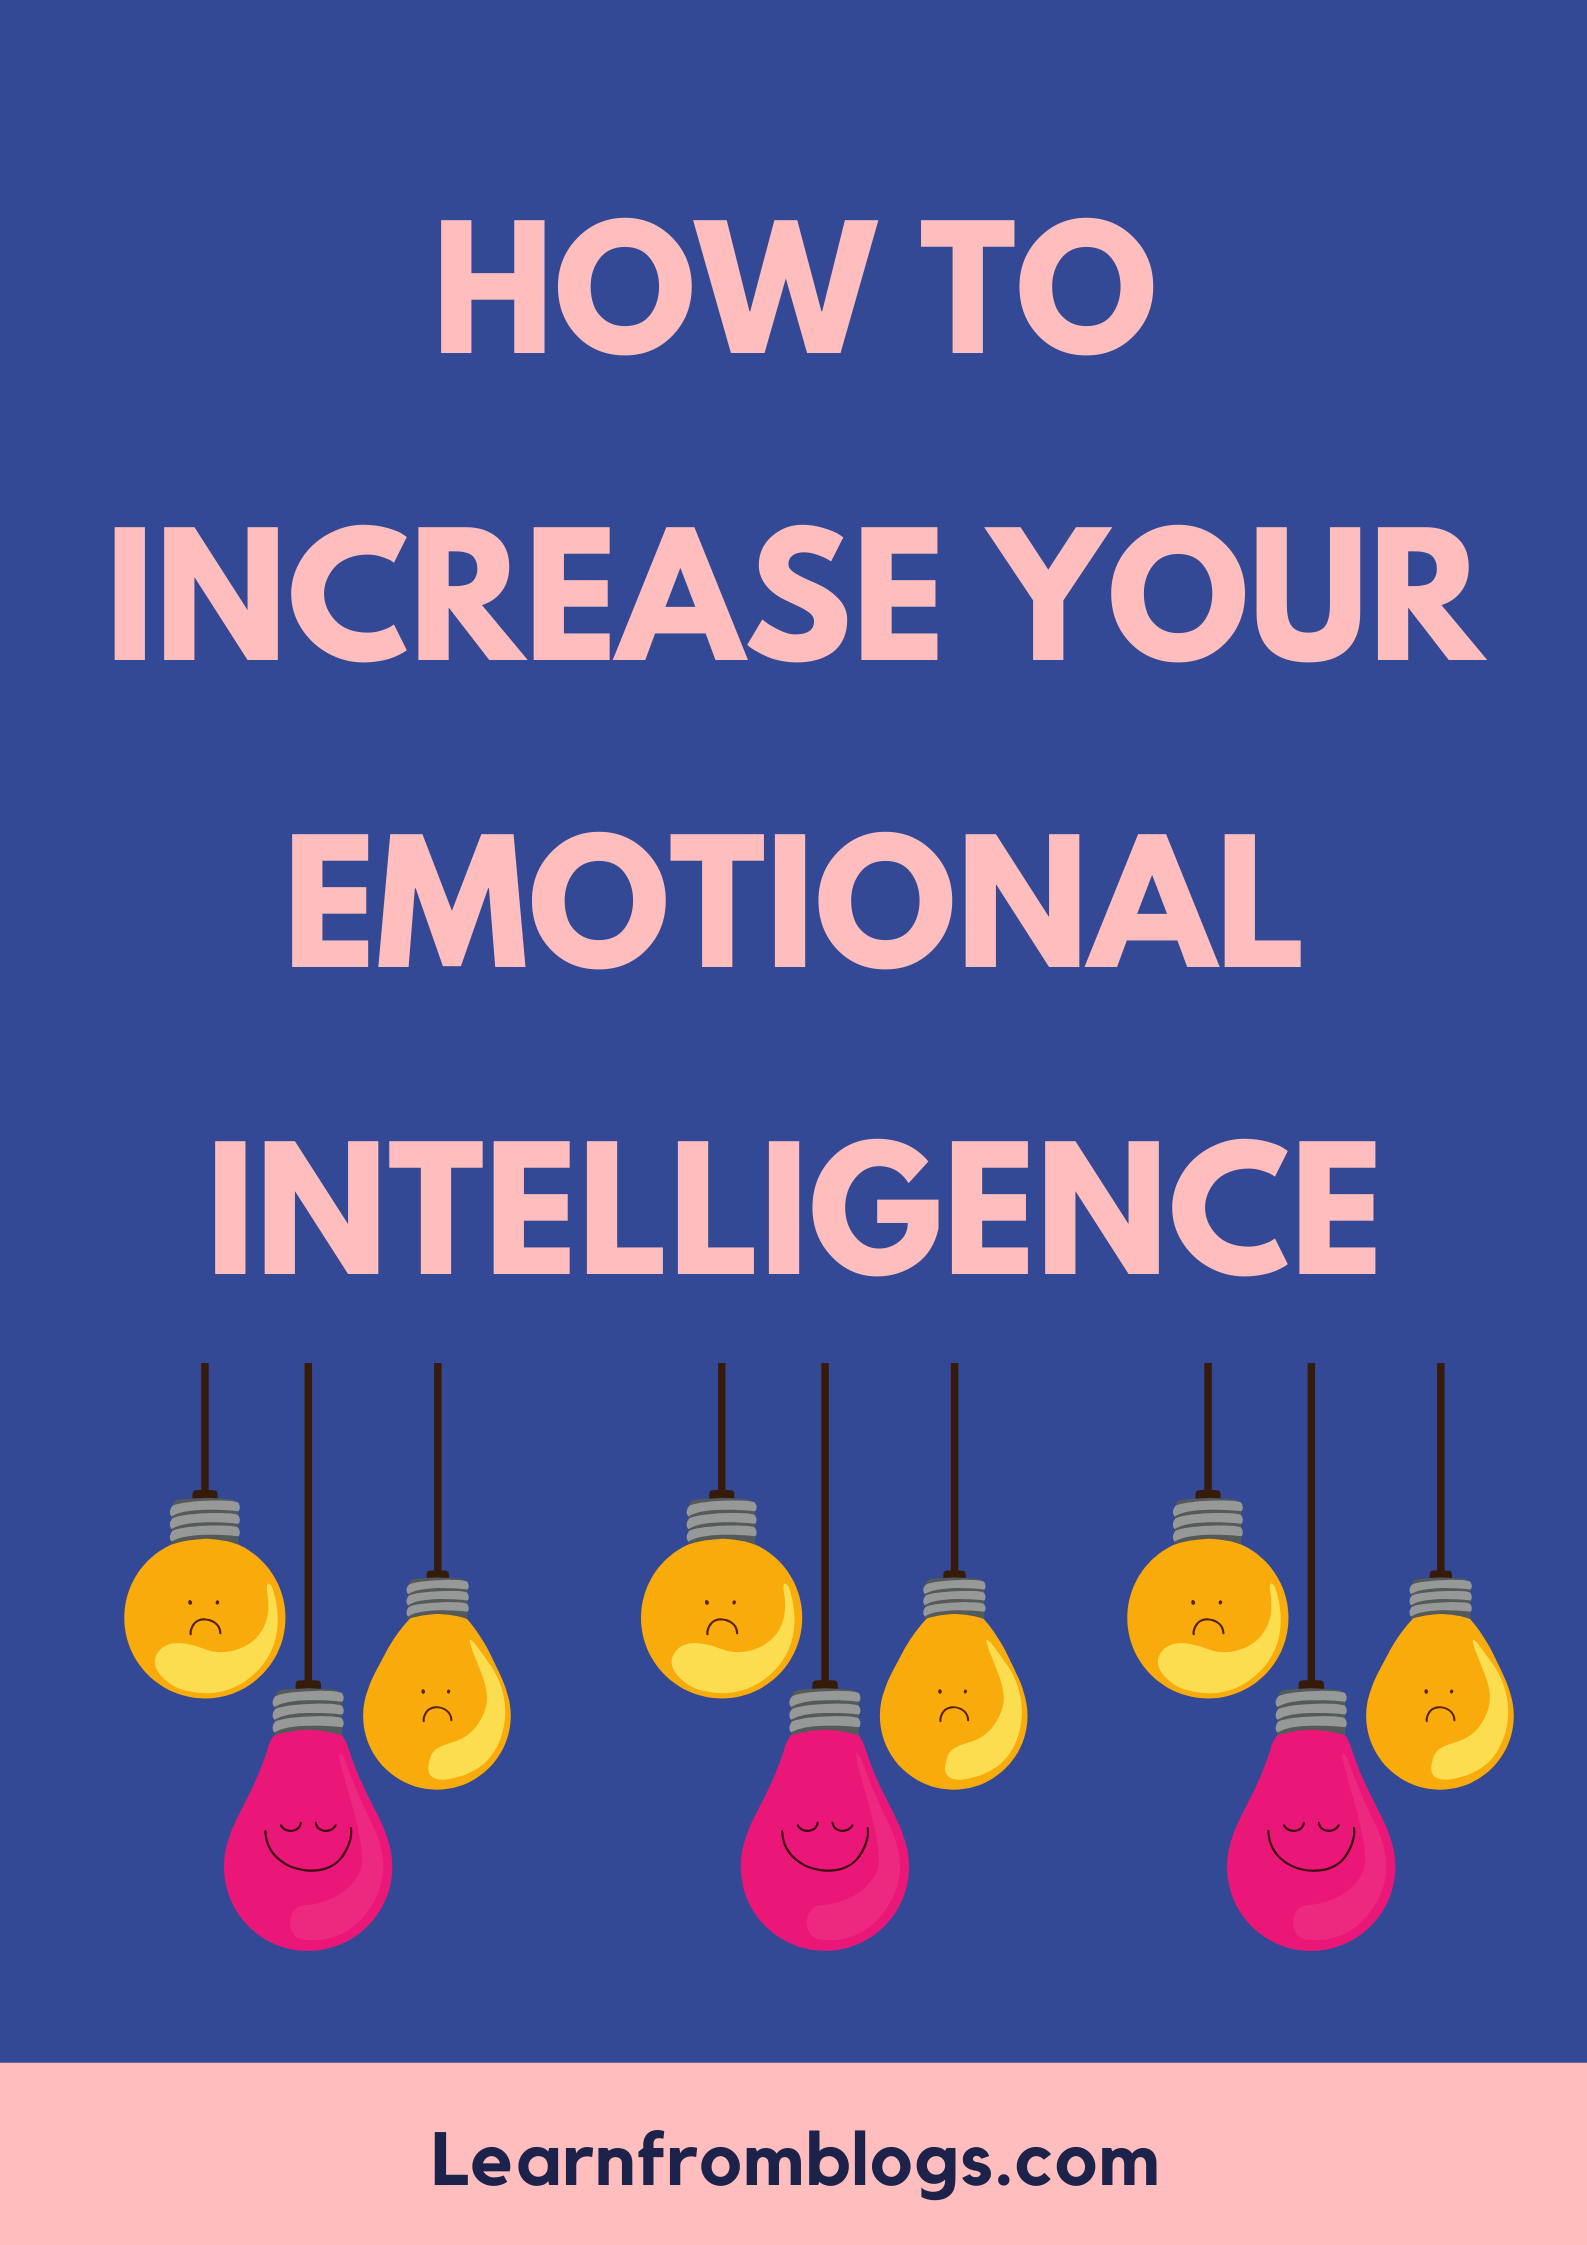 How To Increase Your Emotional Intelligence.png